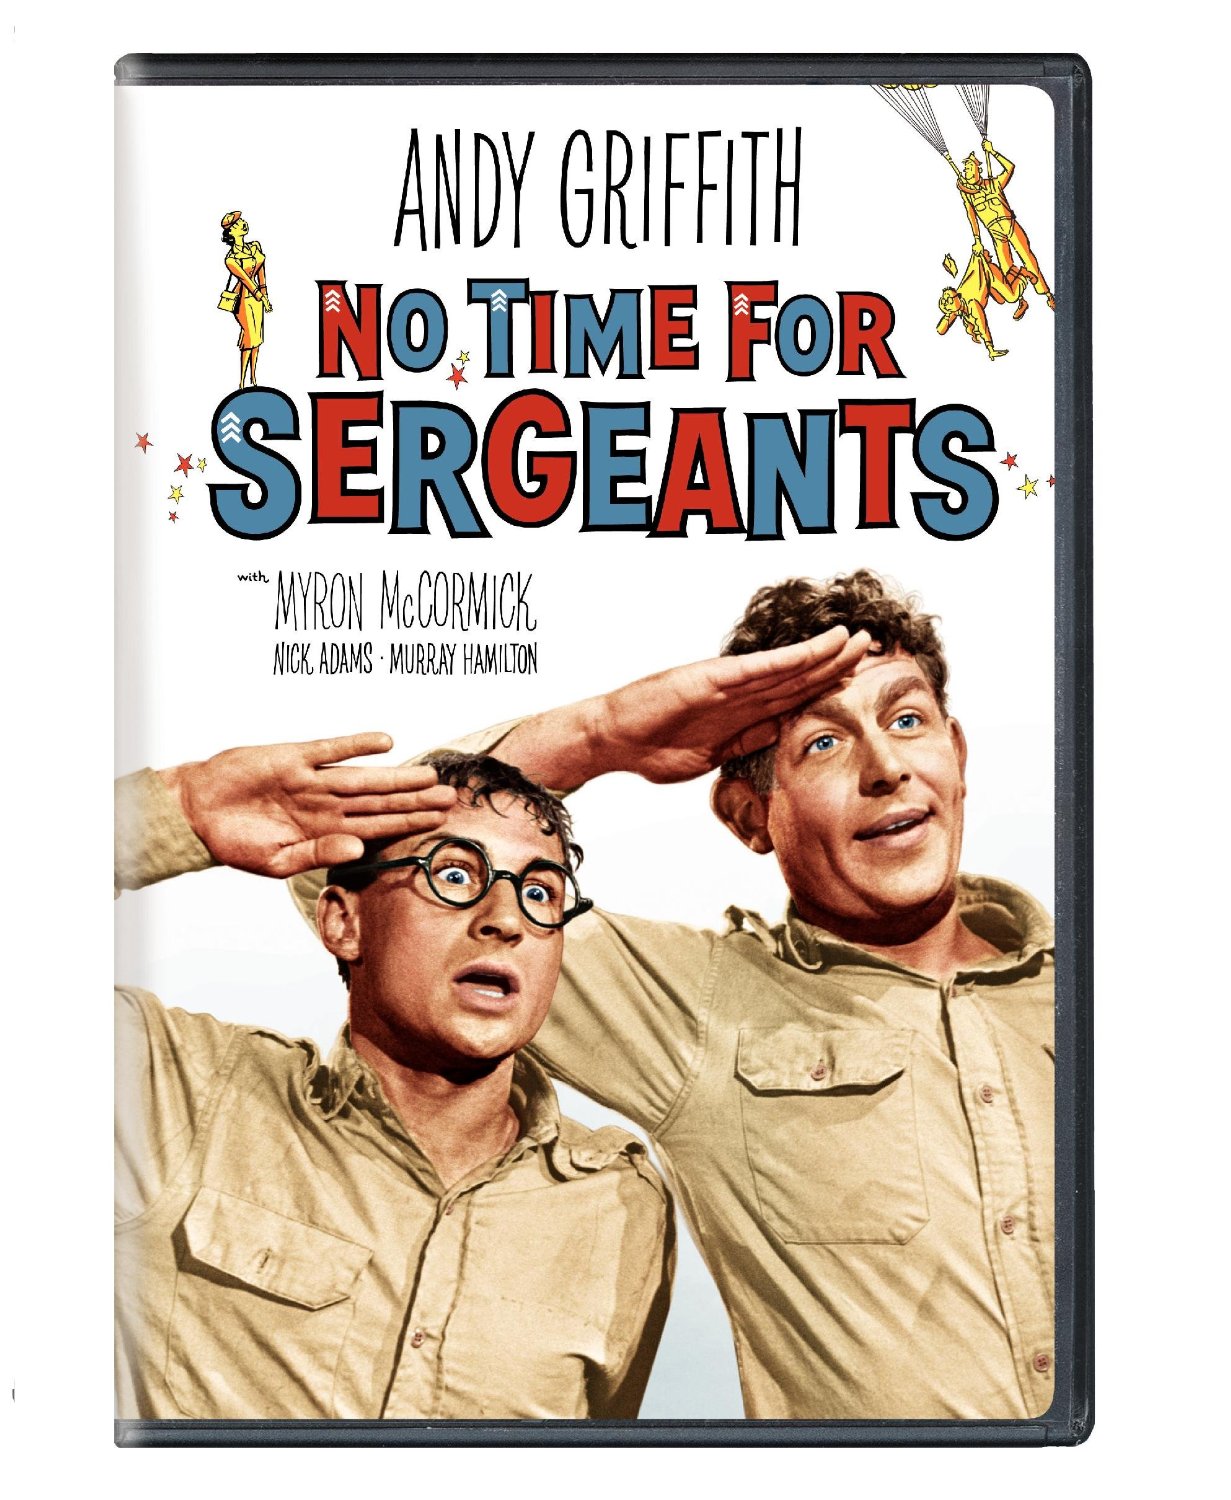 No Time for Sergeants, starring Andy Griffith